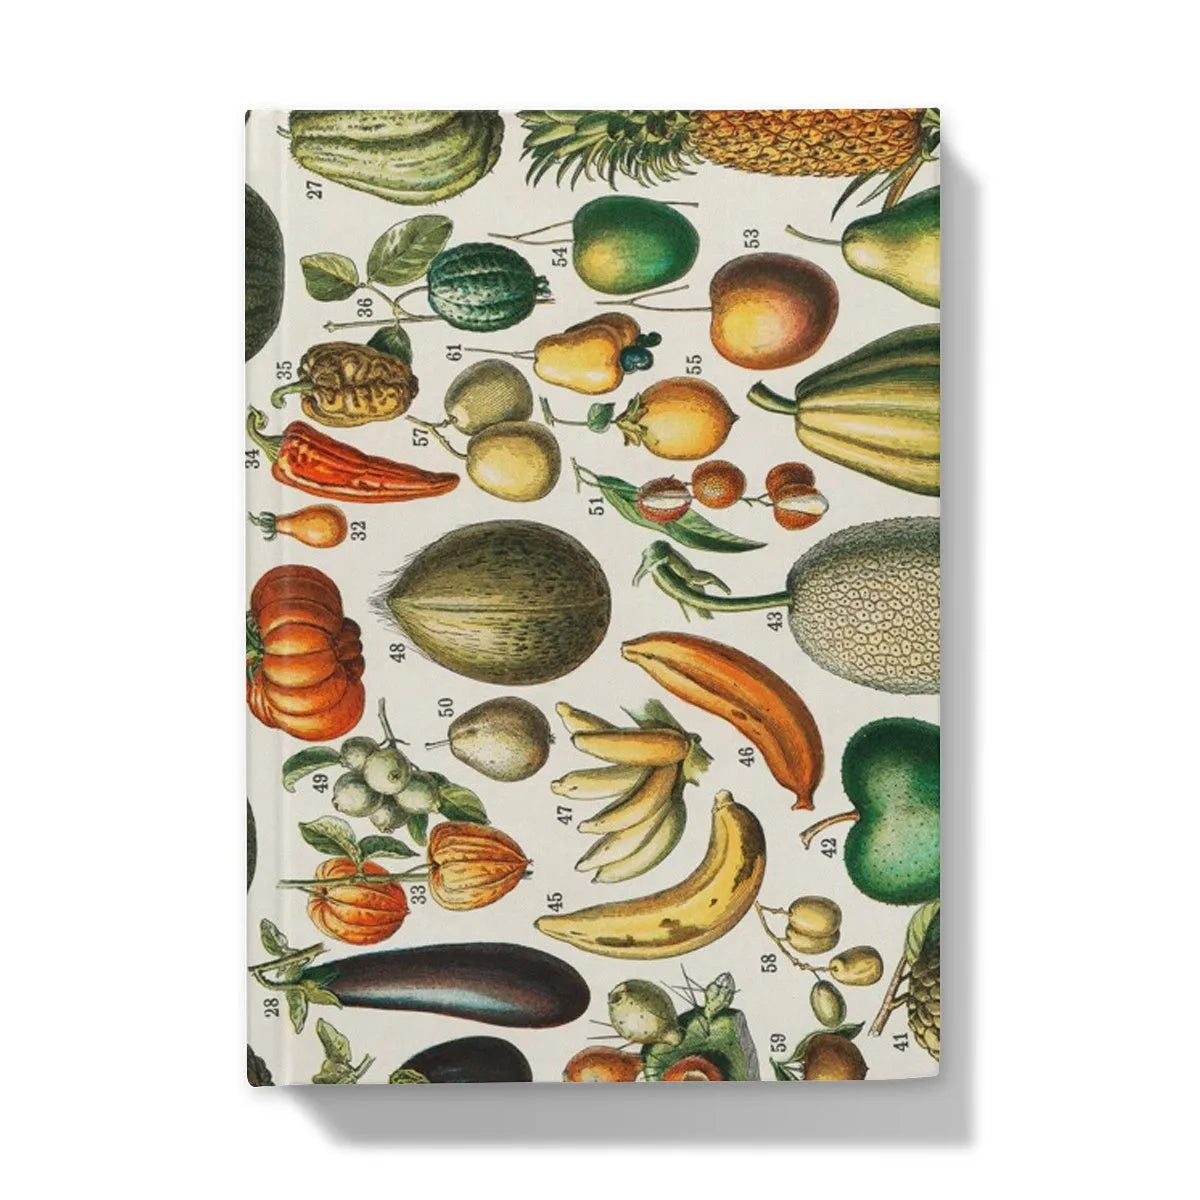 Fruits And Vegetables From Nouveau Larousse Illustre By Larousse Pierre Augé And Claude Hardback Journal - 5’x7’